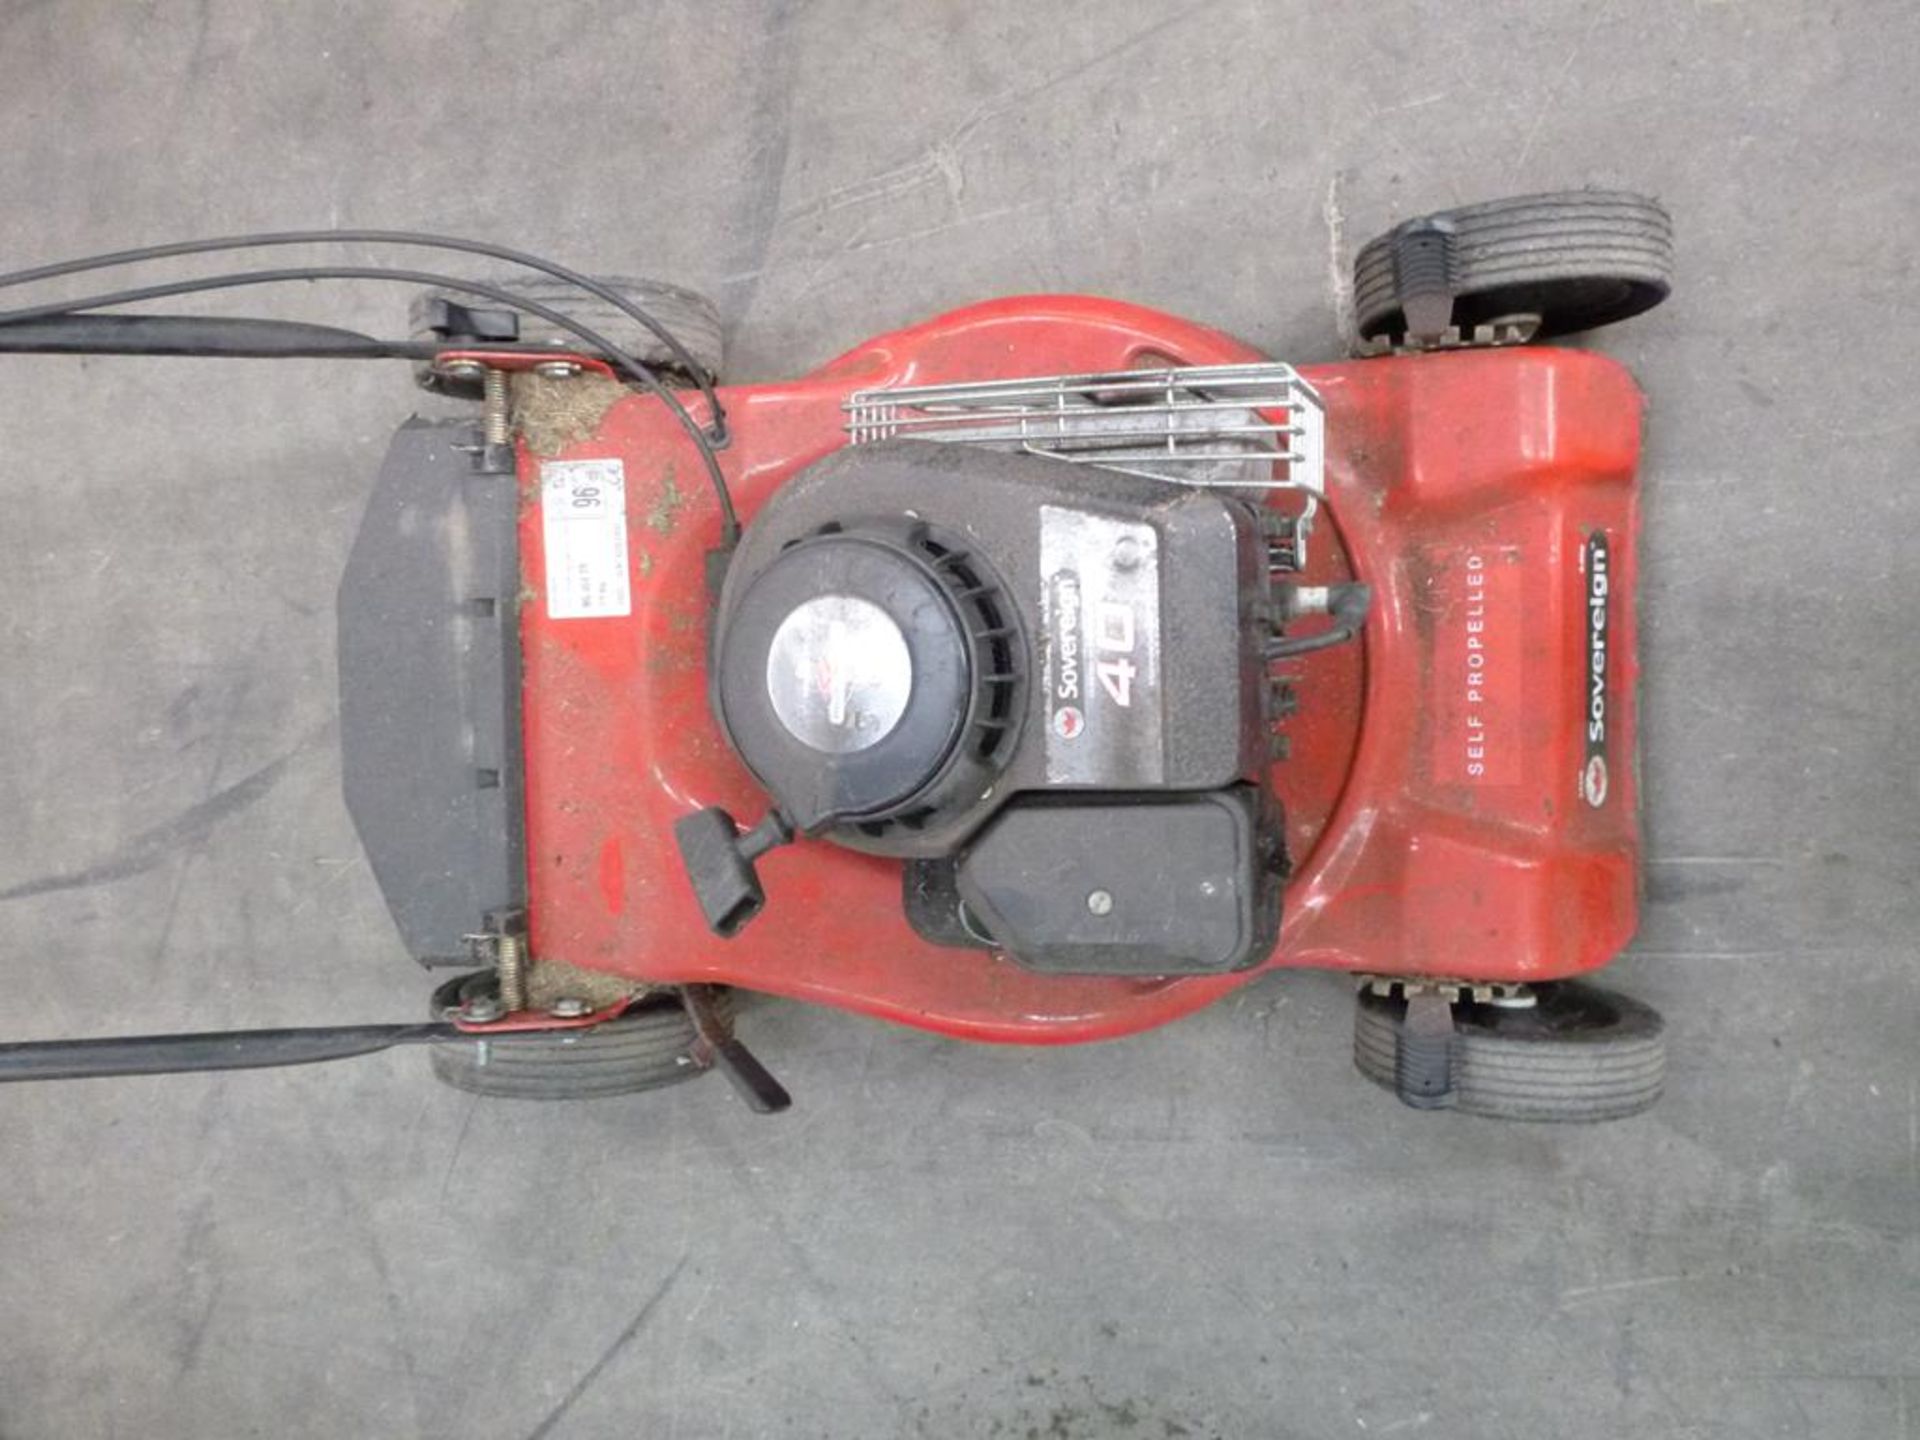 Trade In Sovereign 40NG 464 TR Petrol Powered Briggs & Stratton Engine Lawnmower - Image 2 of 3